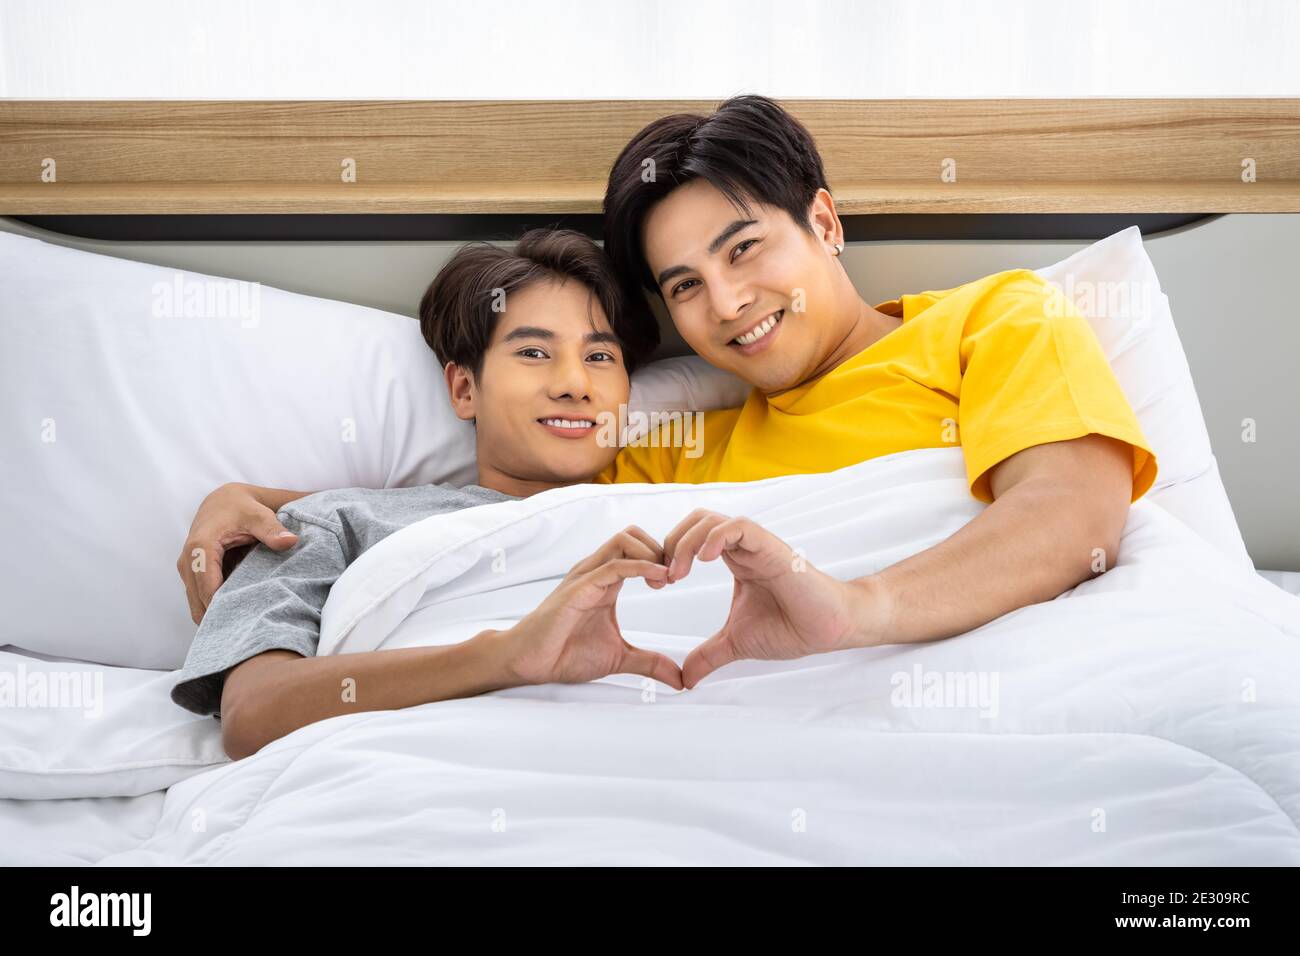 Happy Asian homosexual gay men male couple lying and embracing on bed. LGBT and sexual diversity concept. Looking at camera. Stock Photo